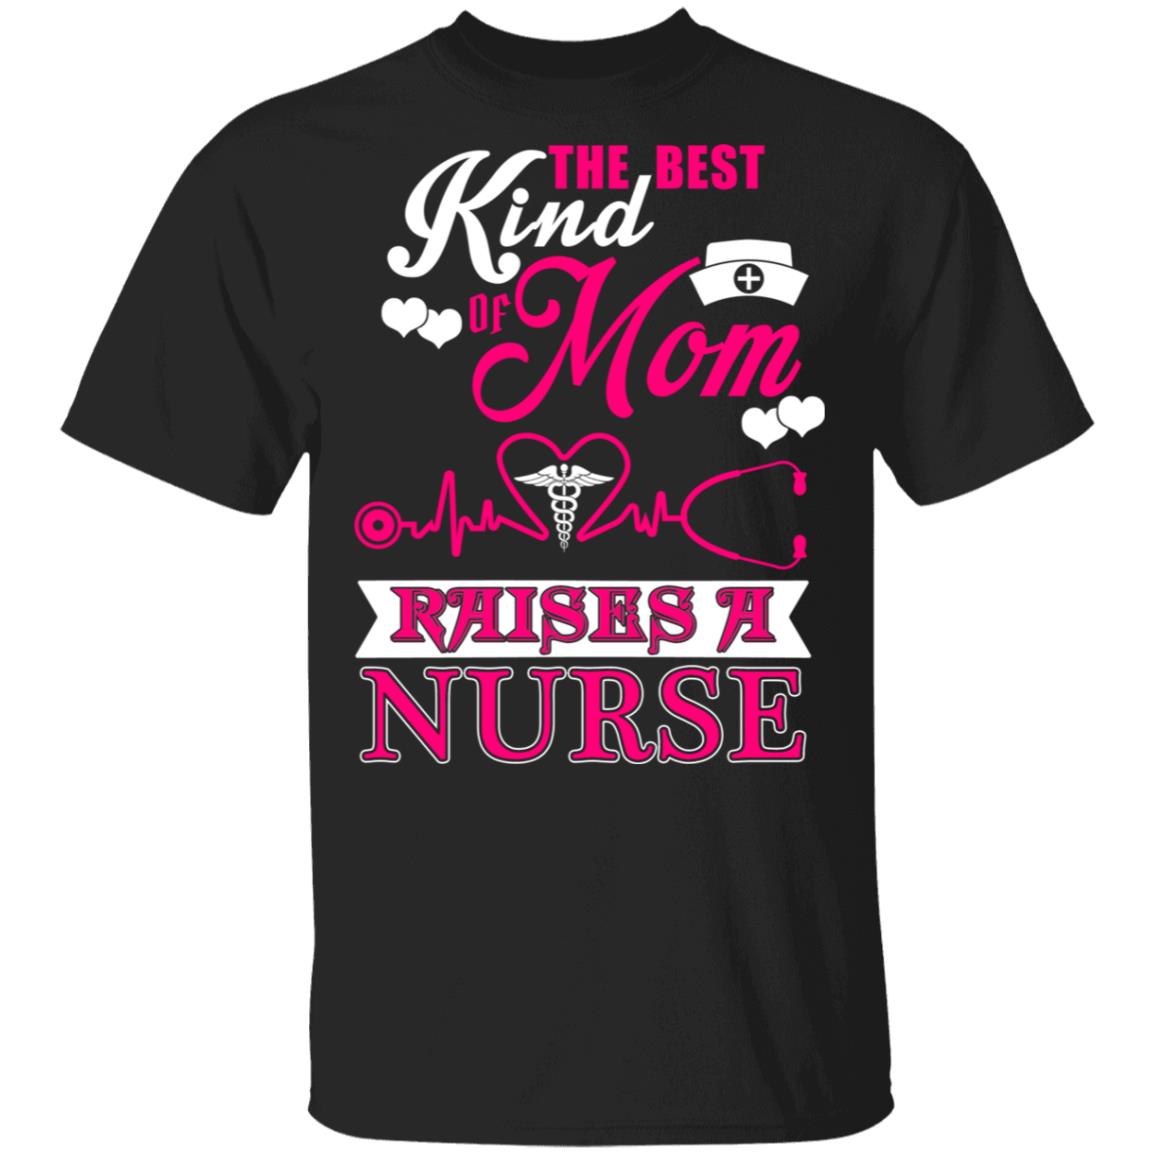 The Best Kind Of Mom Raises a Nurse TShirt Mother's Day Gift